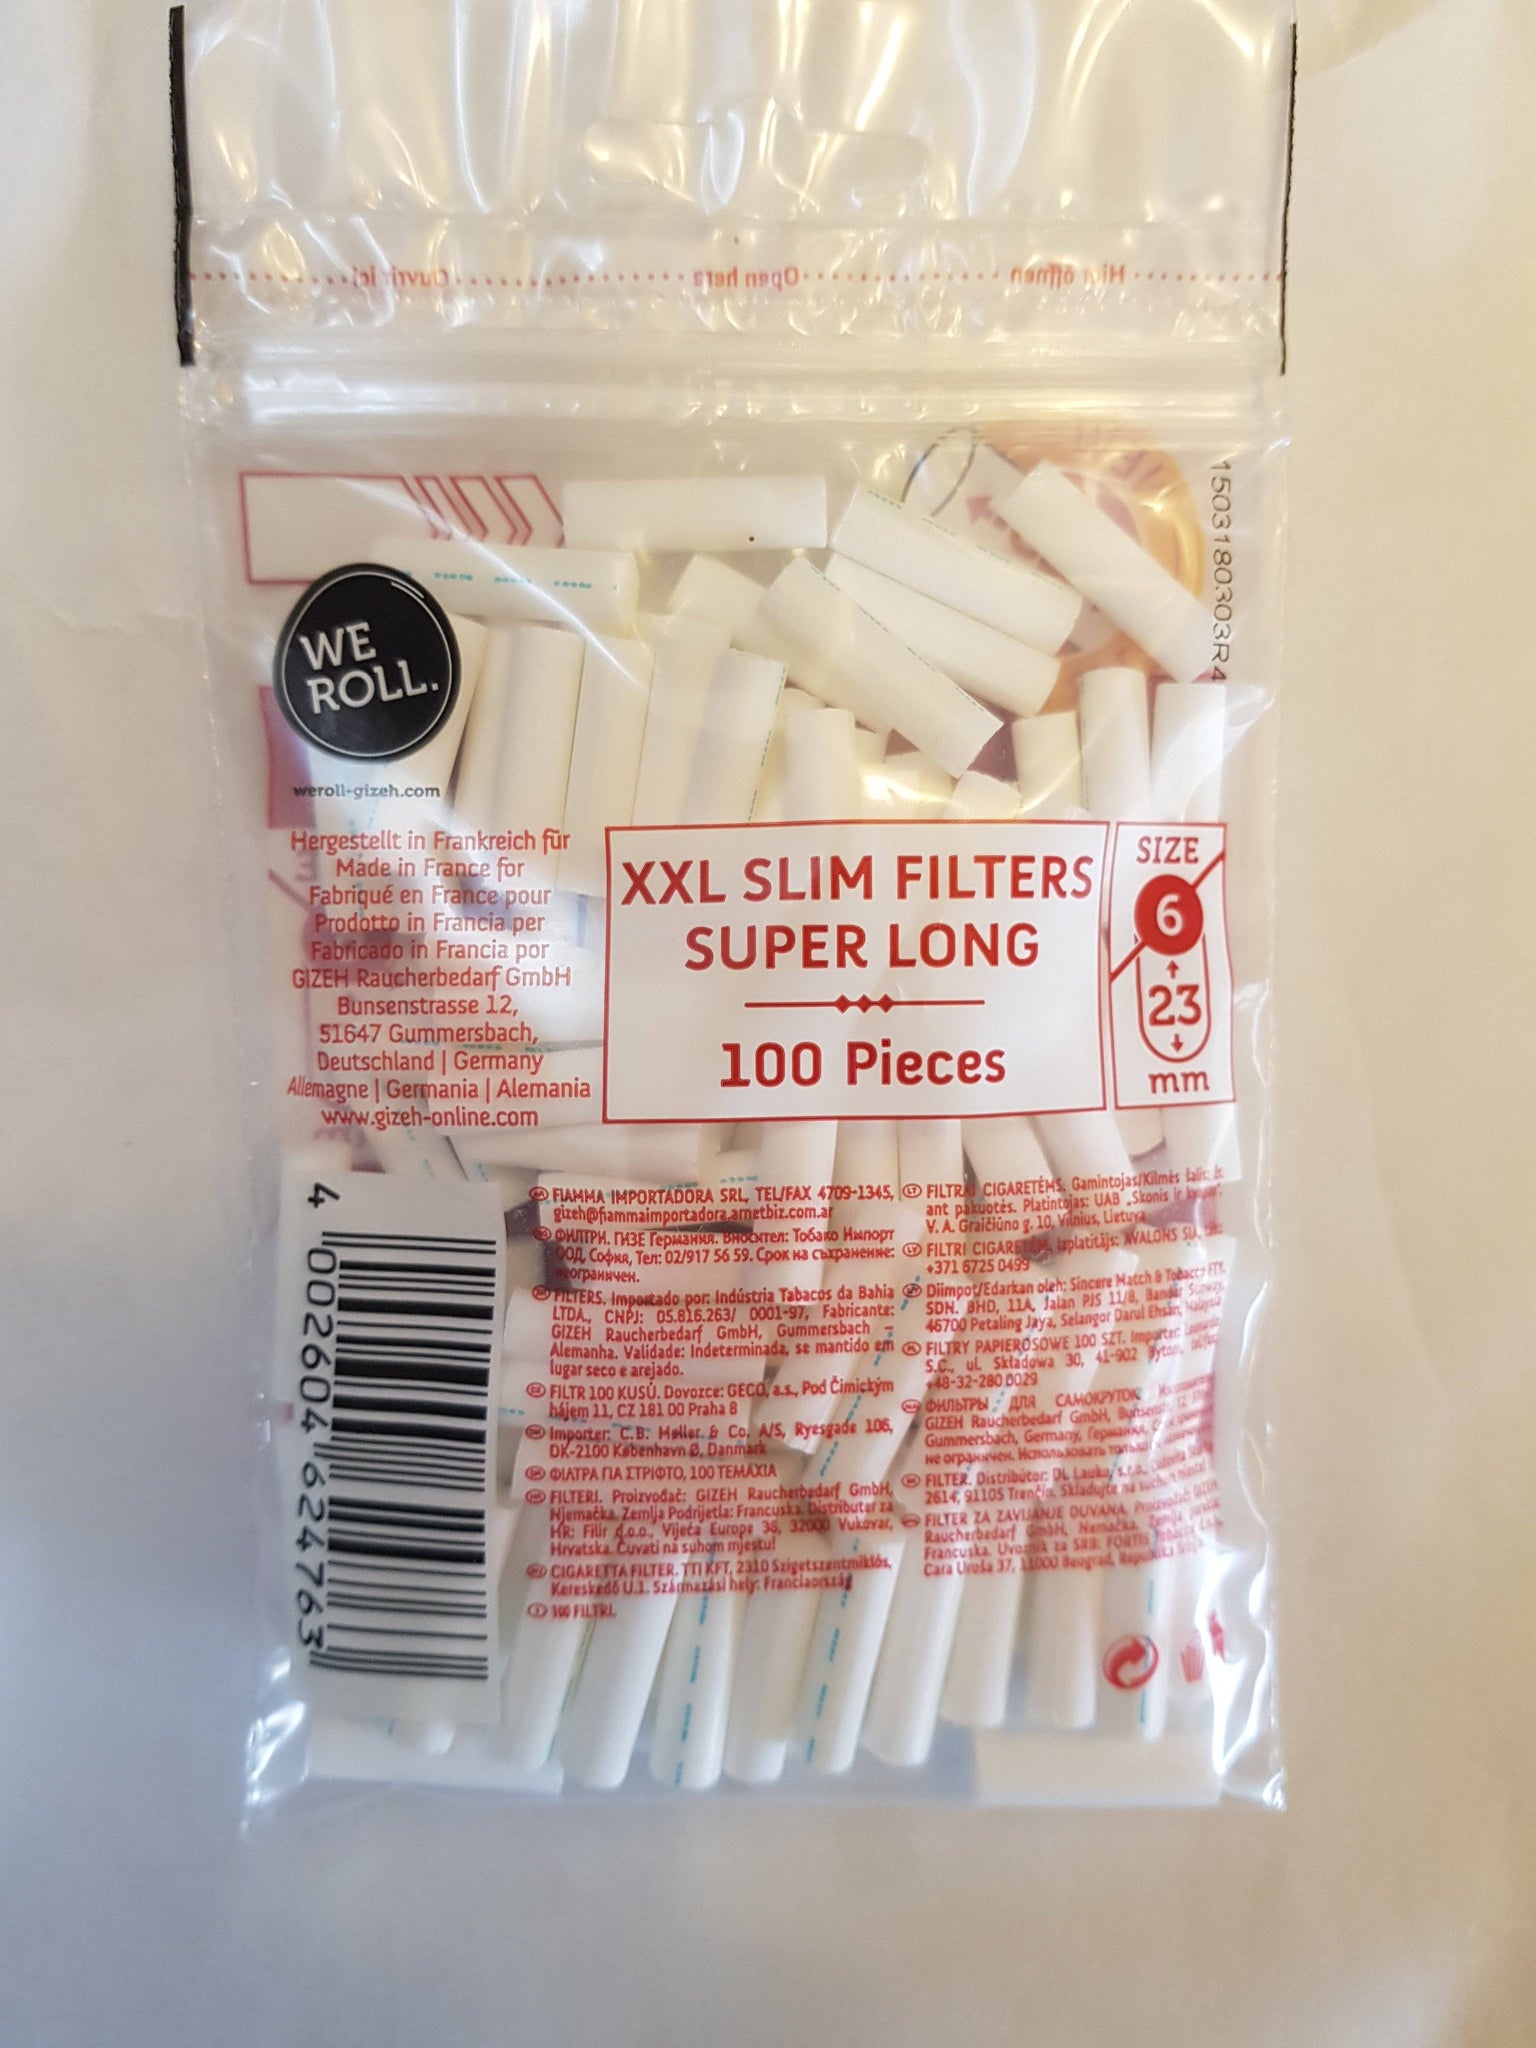 Gizeh slim cigarette filters XXL 6/23mm super long lot of 5 bags of 100  filters